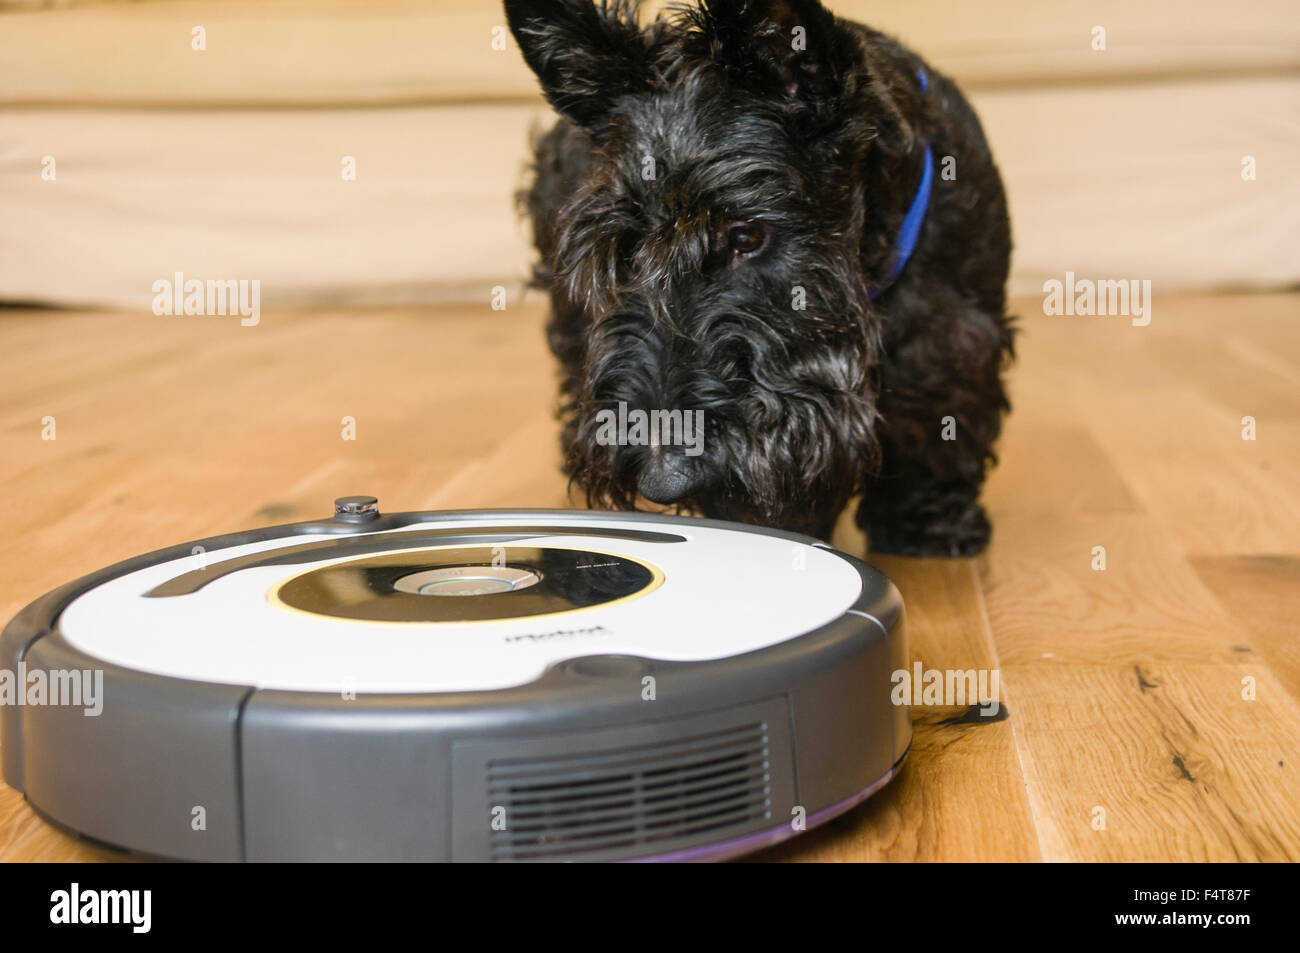 A Scottish Terrier dog looks on warily as an iRobot Roomba robotic vacuum cleaner cleaning a wooden living room floor Stock Photo